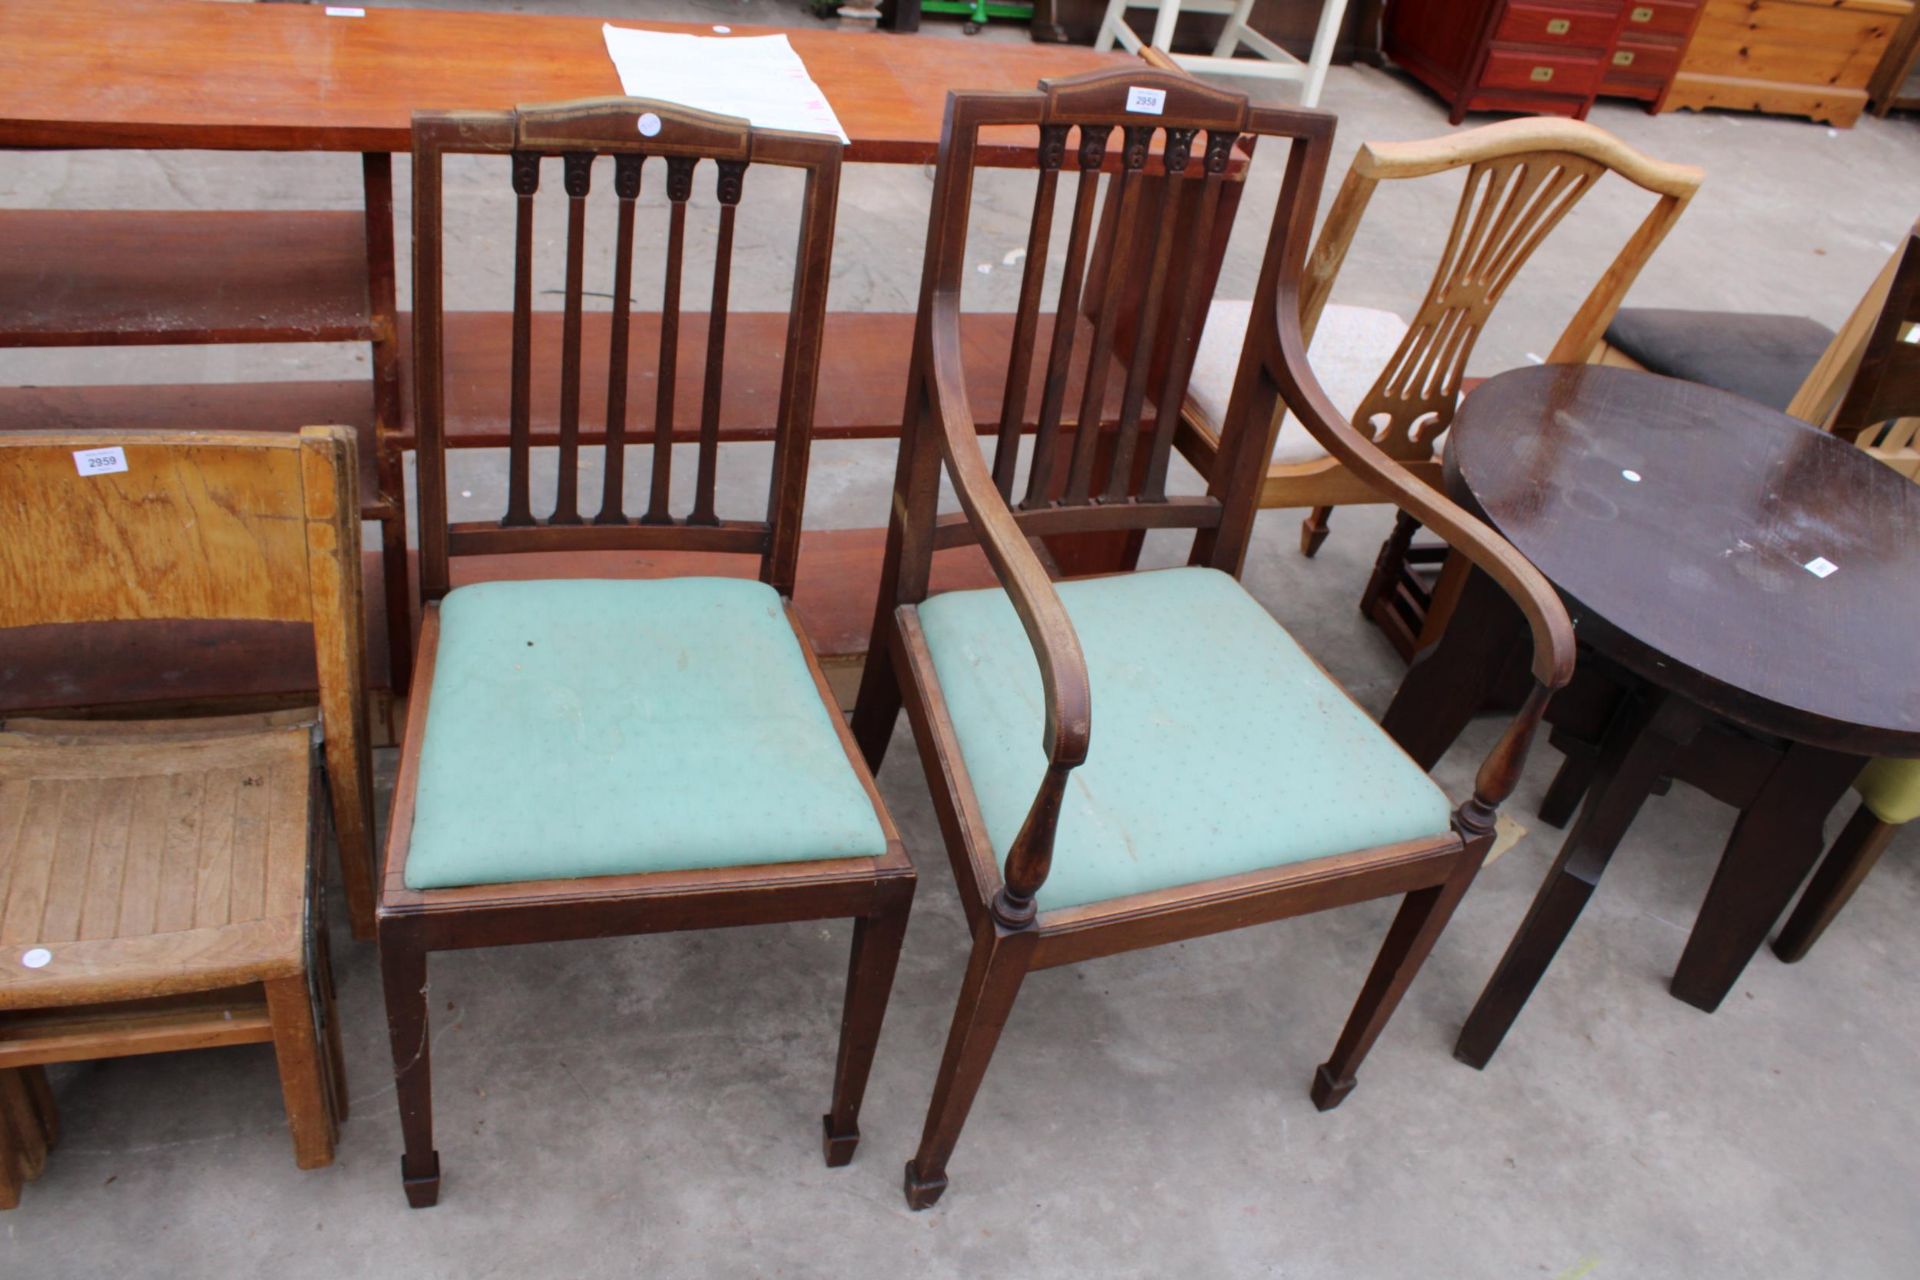 AN EDWARDIAN MAHOGANY AND INLAID CARVER CHAIR AND MATCHING DINING CHAIR